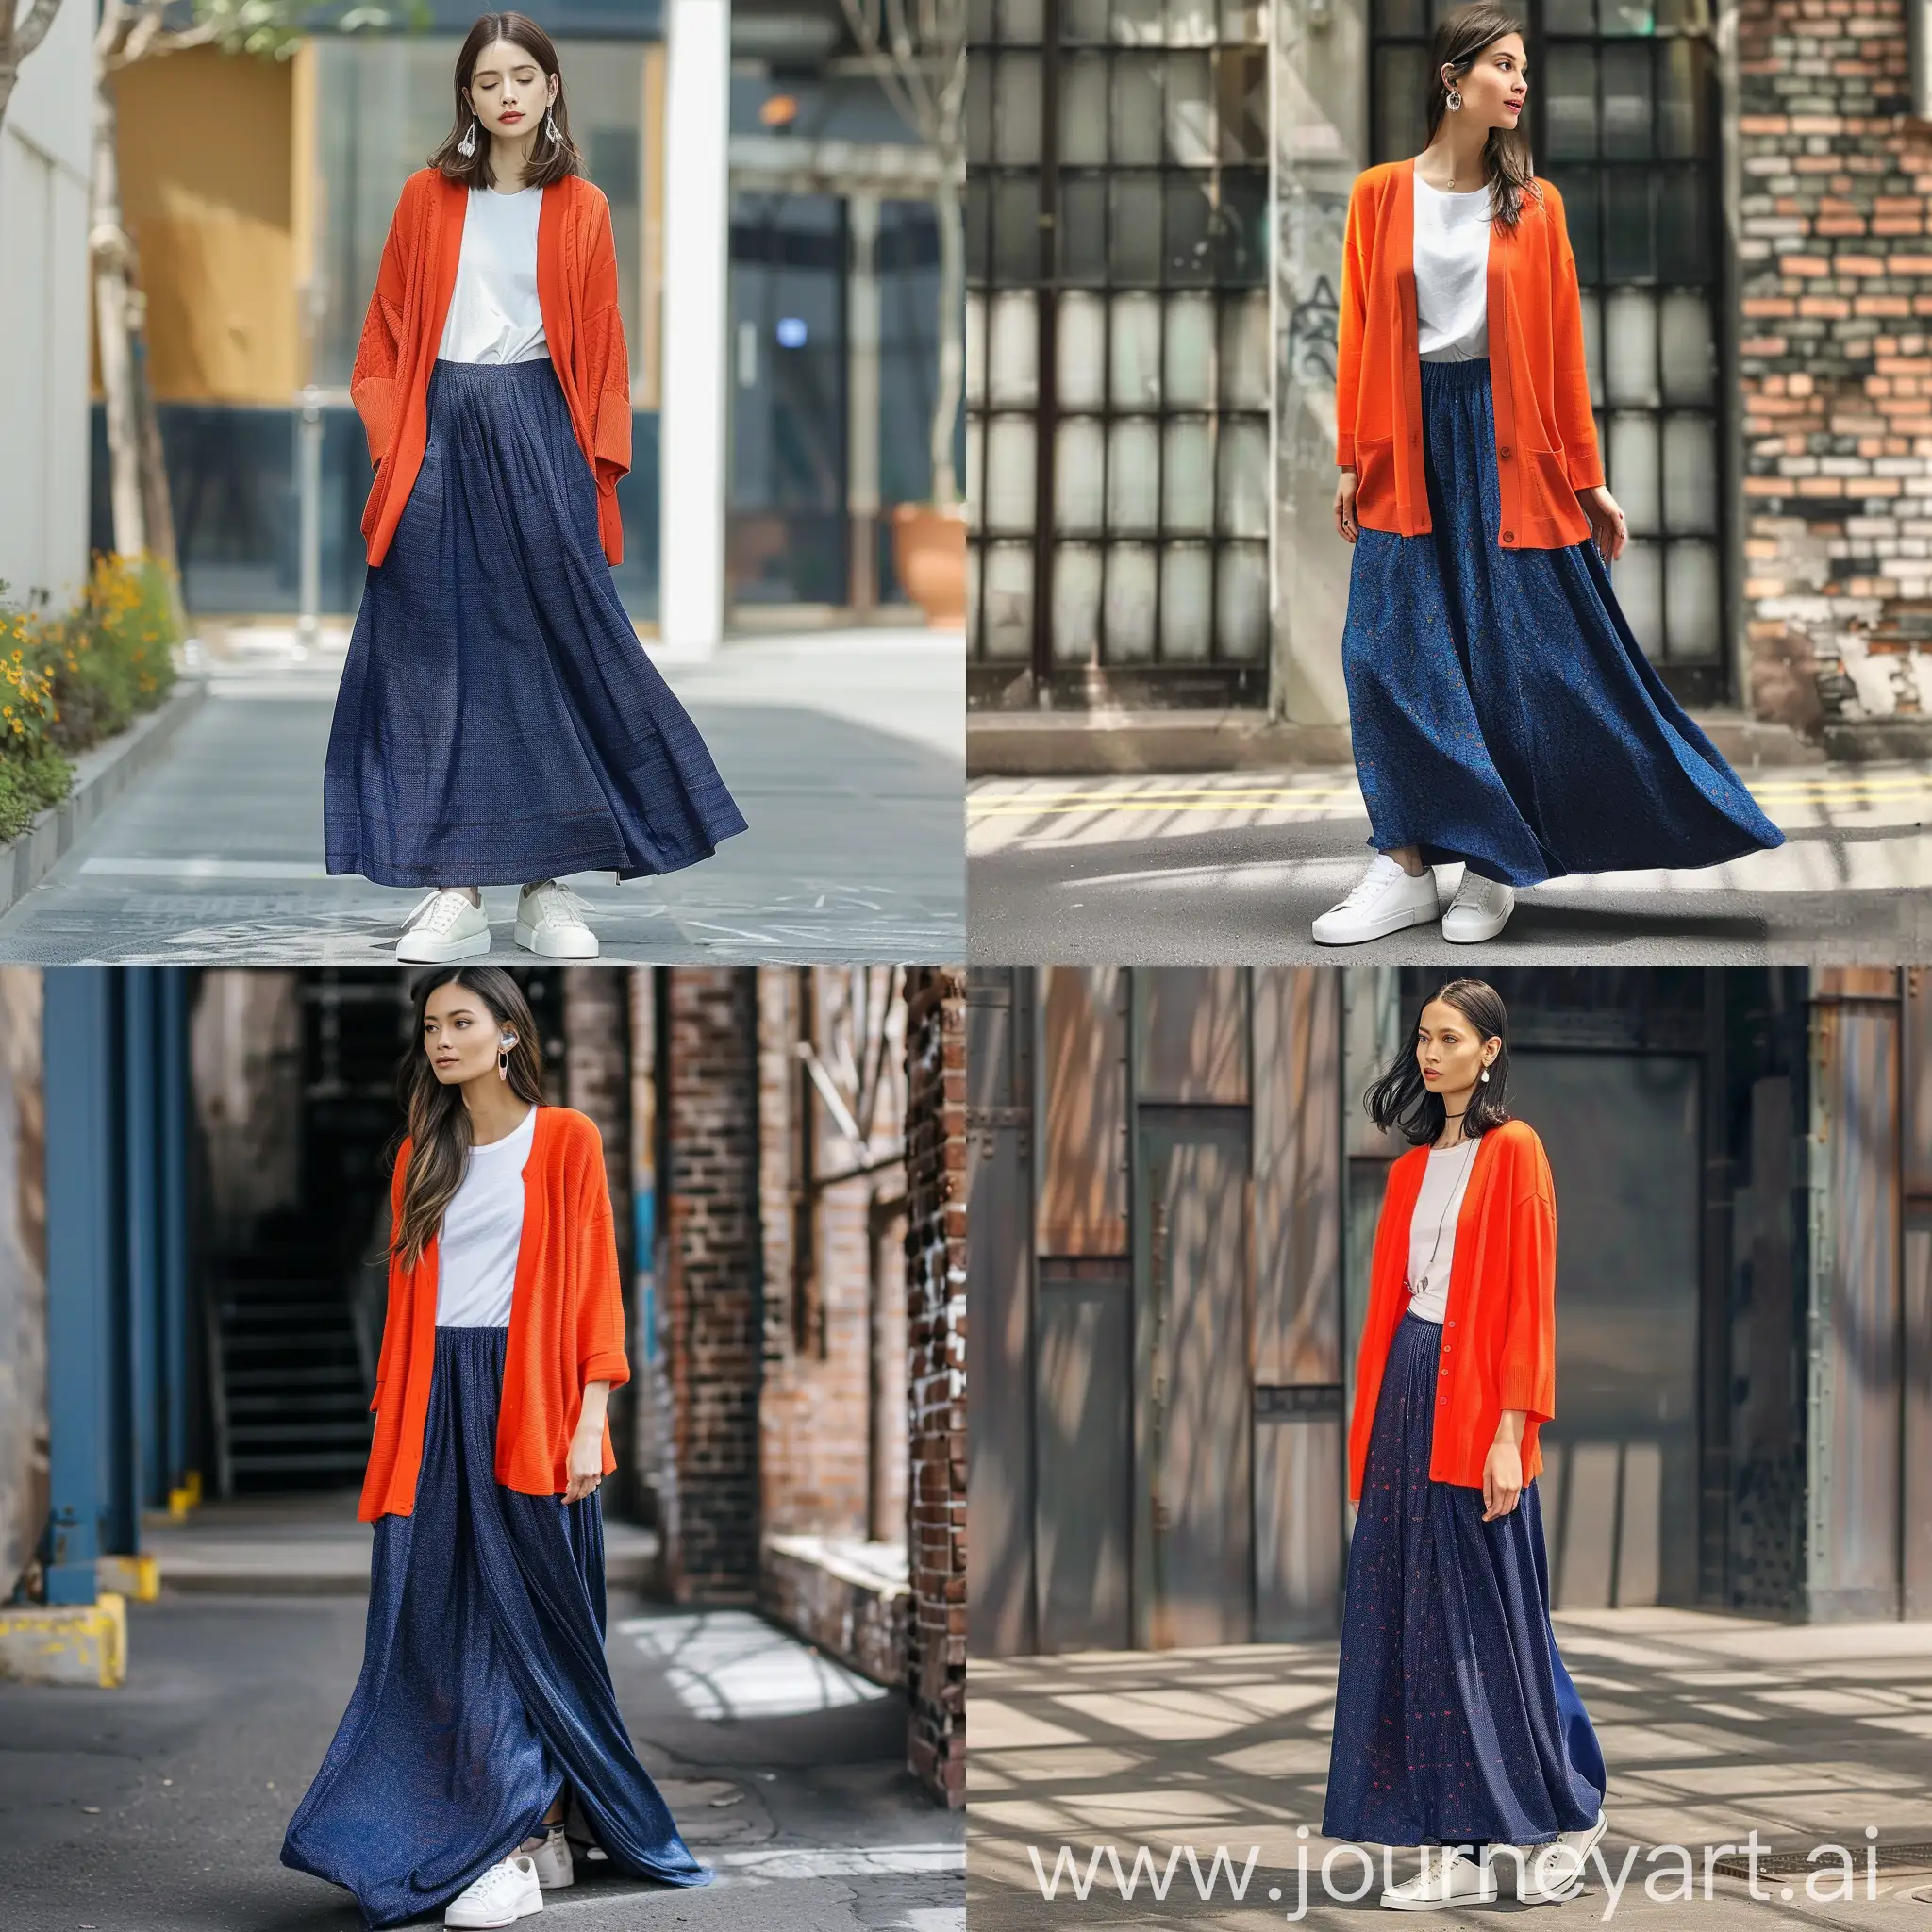 Generate a professional fashion picture showing a woman wearing a lightweight cardigan in a bright orange tone, paired with a comfortable and flowing dark blue long skirt with subtle pattern. Complete the look with white sneakers or in a color that complements the outfit. The woman may wear a basic t-shirt under the cardigan if desired. Accessories are minimalist, such as small earrings or a simple necklace. The scene has an urban backgr